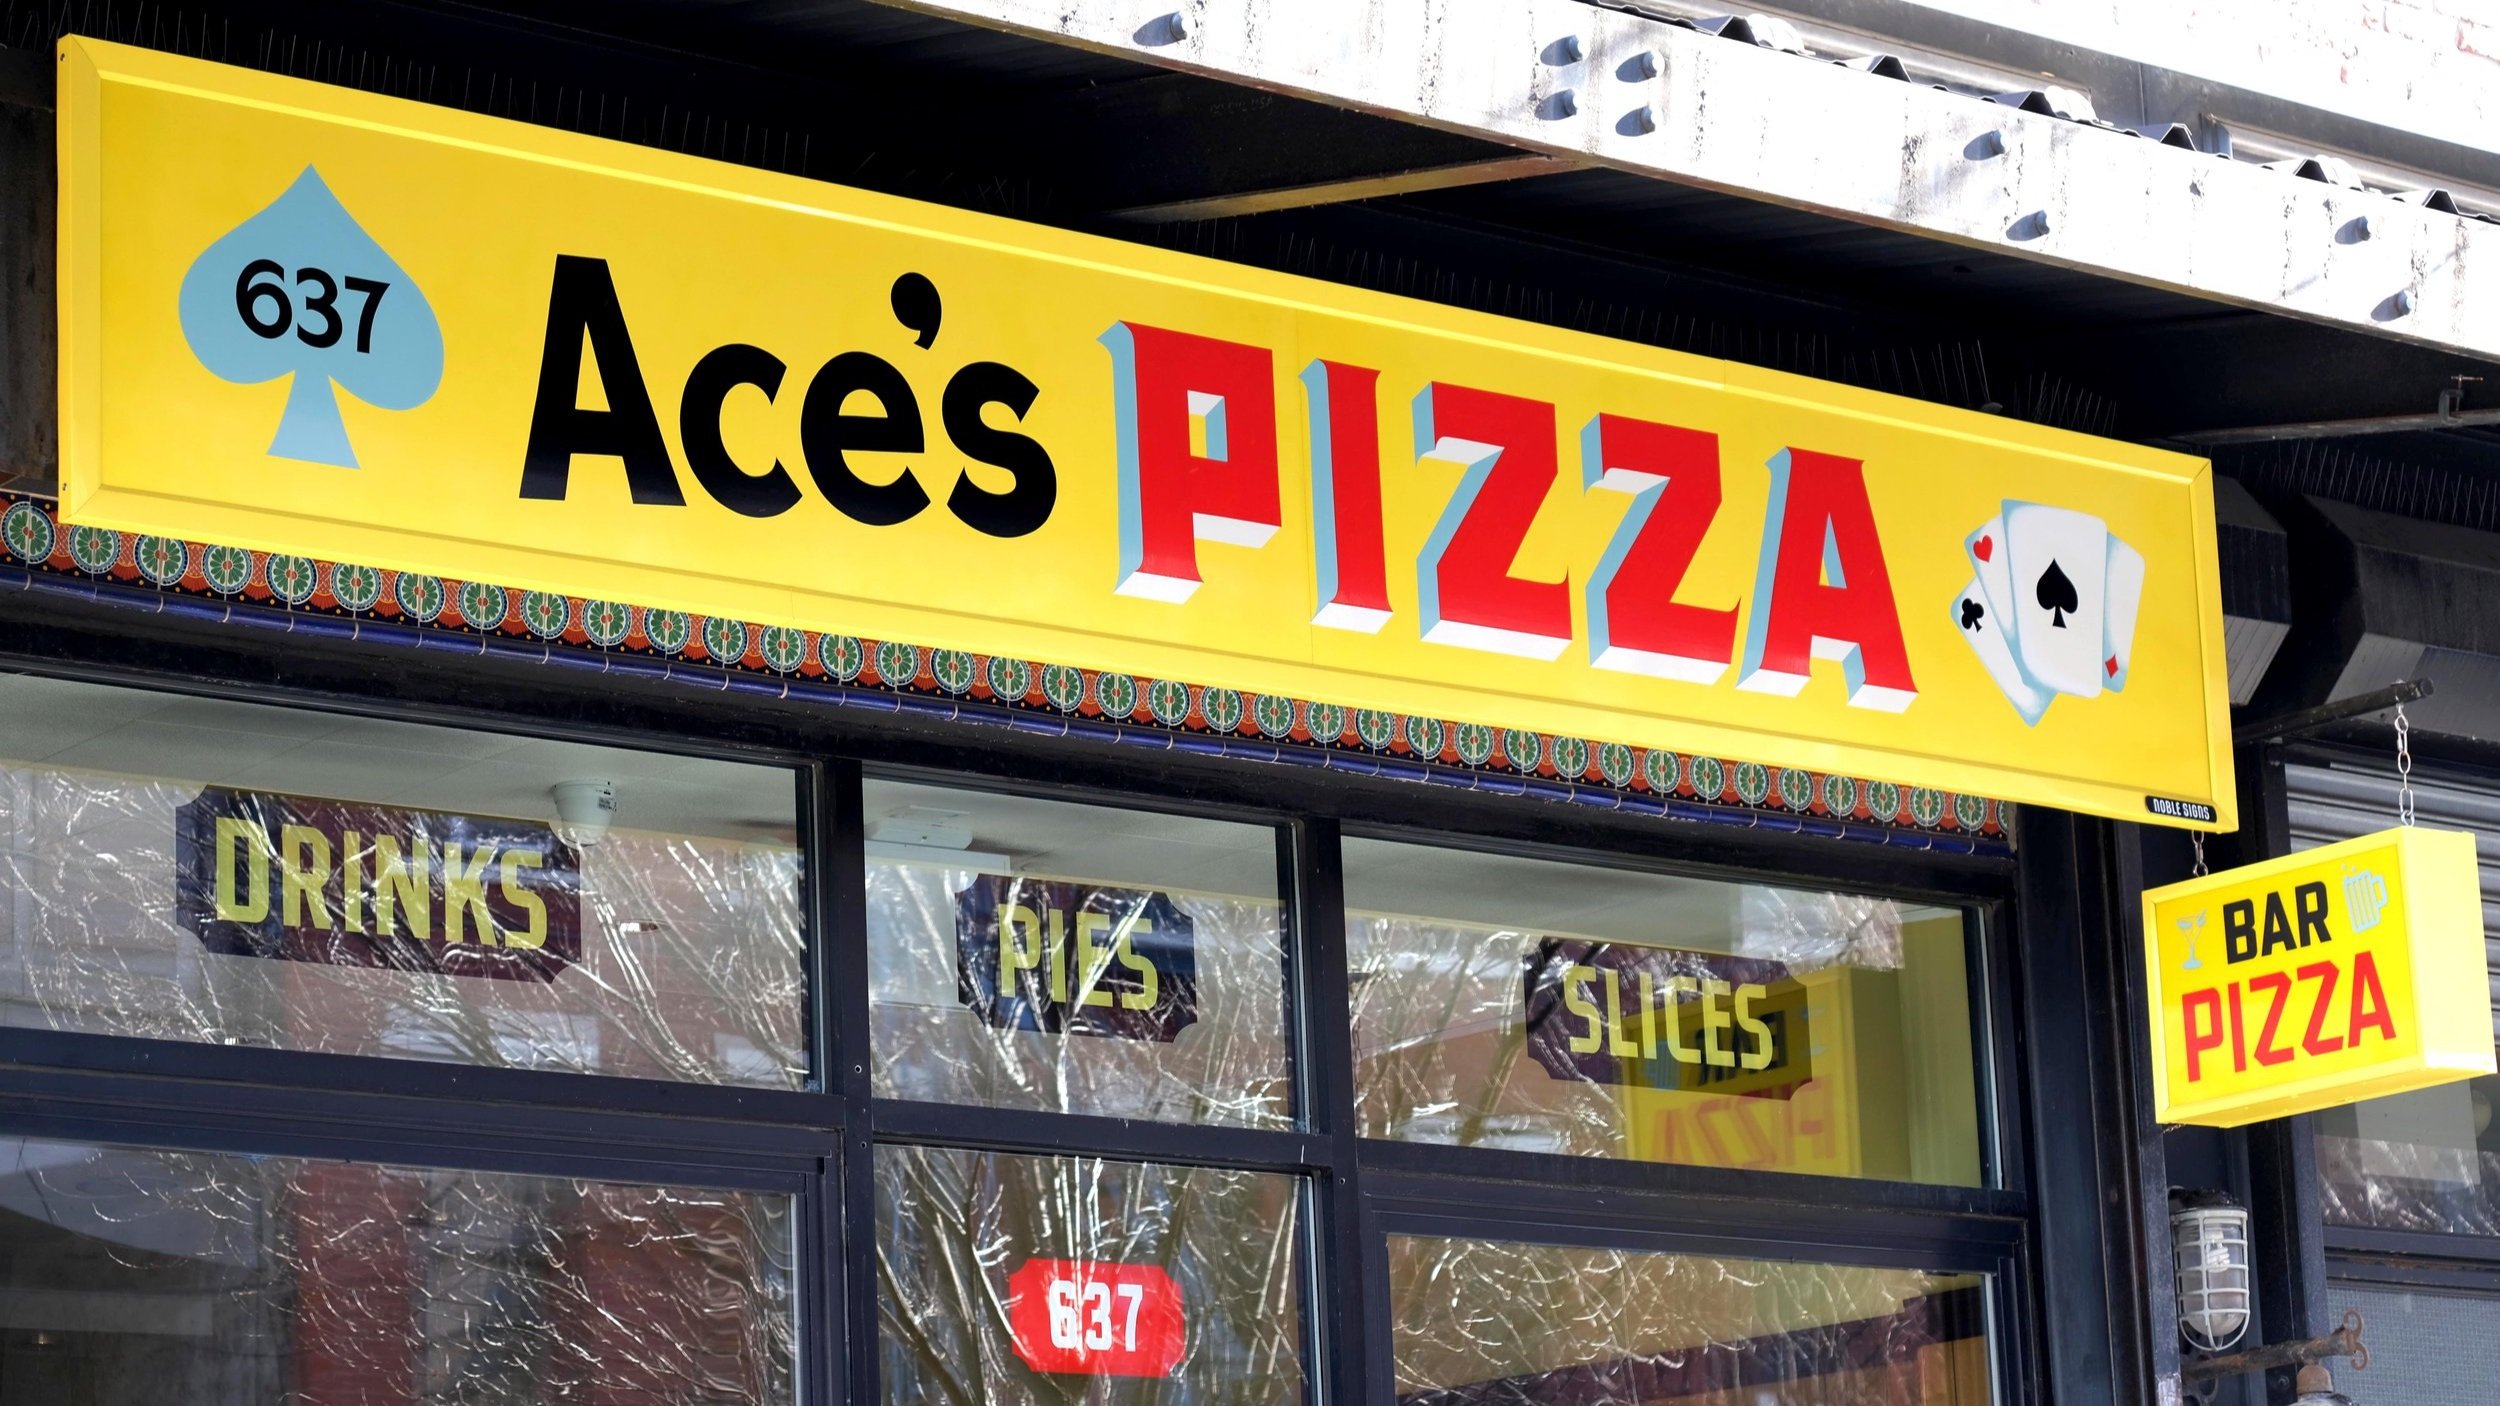  Yellow storefront sign reading “Ace’s Pizza” in black and red handpainted block lettering, with paintings of a spade and a hand of cards on the sides 